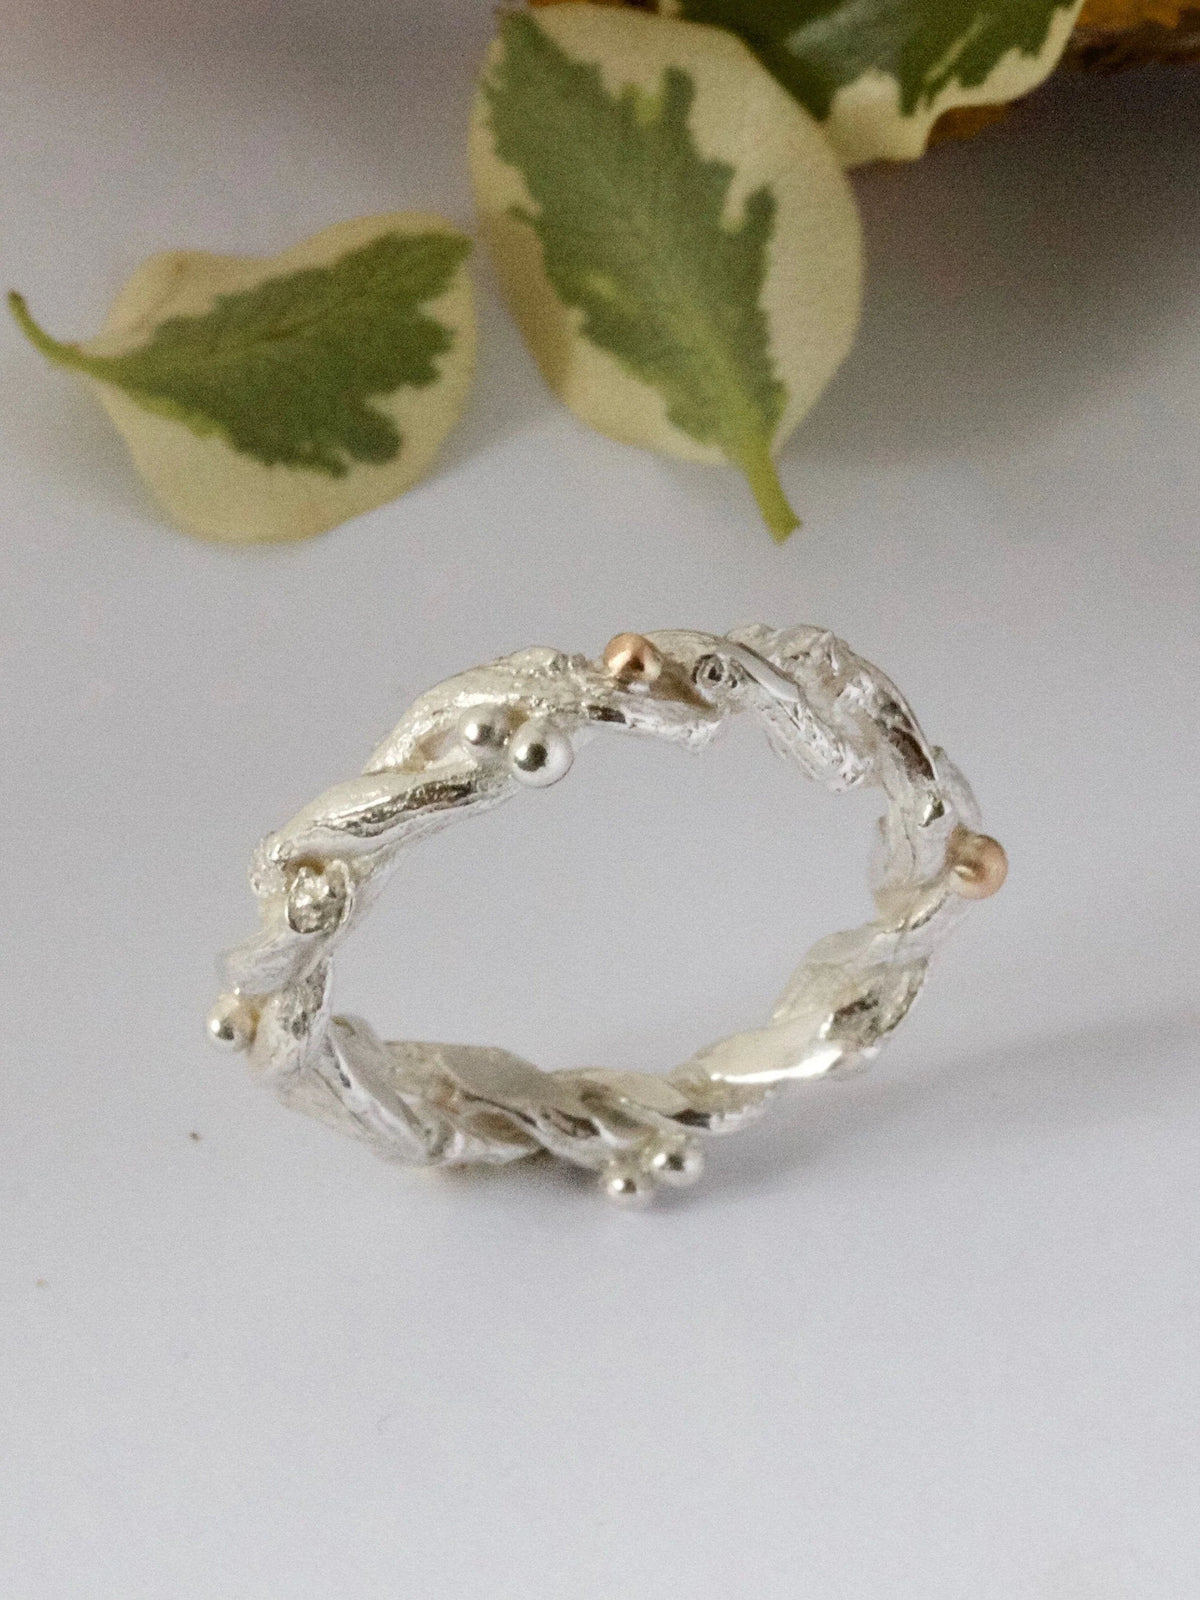 Organic Silver Band Ring-Entwined Forest Twig Ring-Alternative Wedding Ring - Boutee